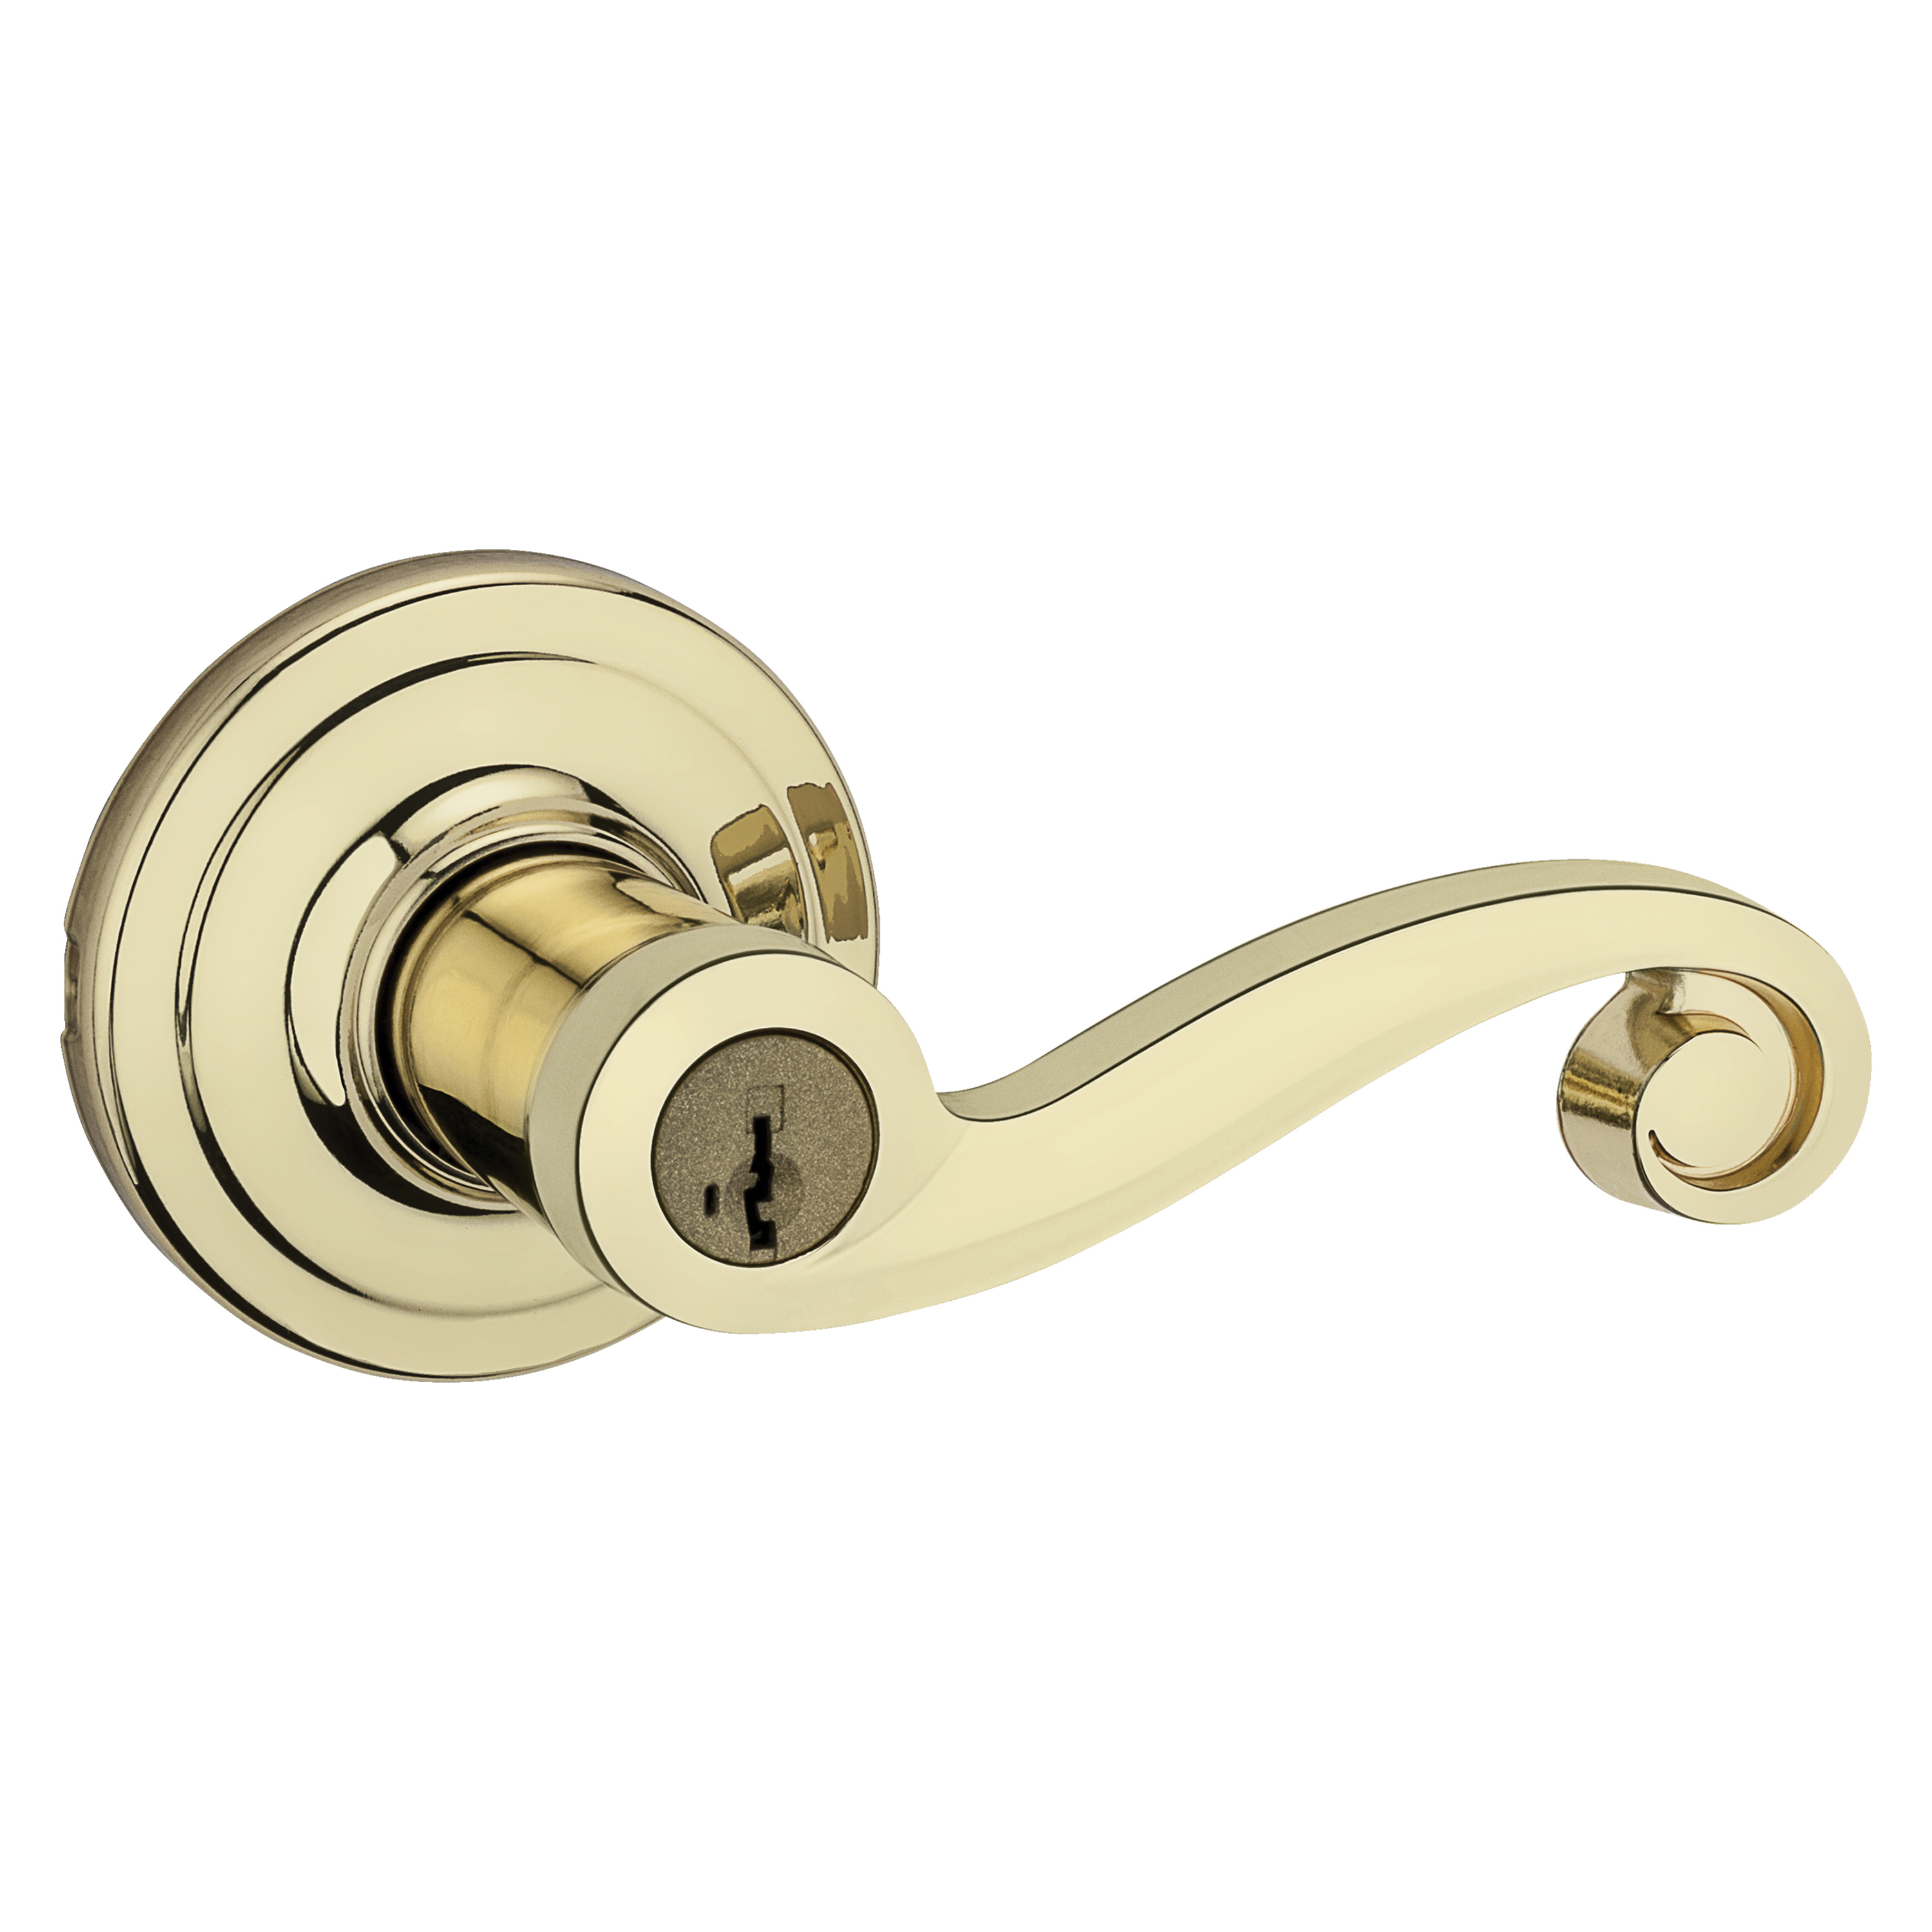 Kwikset Signature Series 740LL3SMTCP Entry Lever, Polished Brass, Zinc, Residential, Re-Key Technology: SmartKey